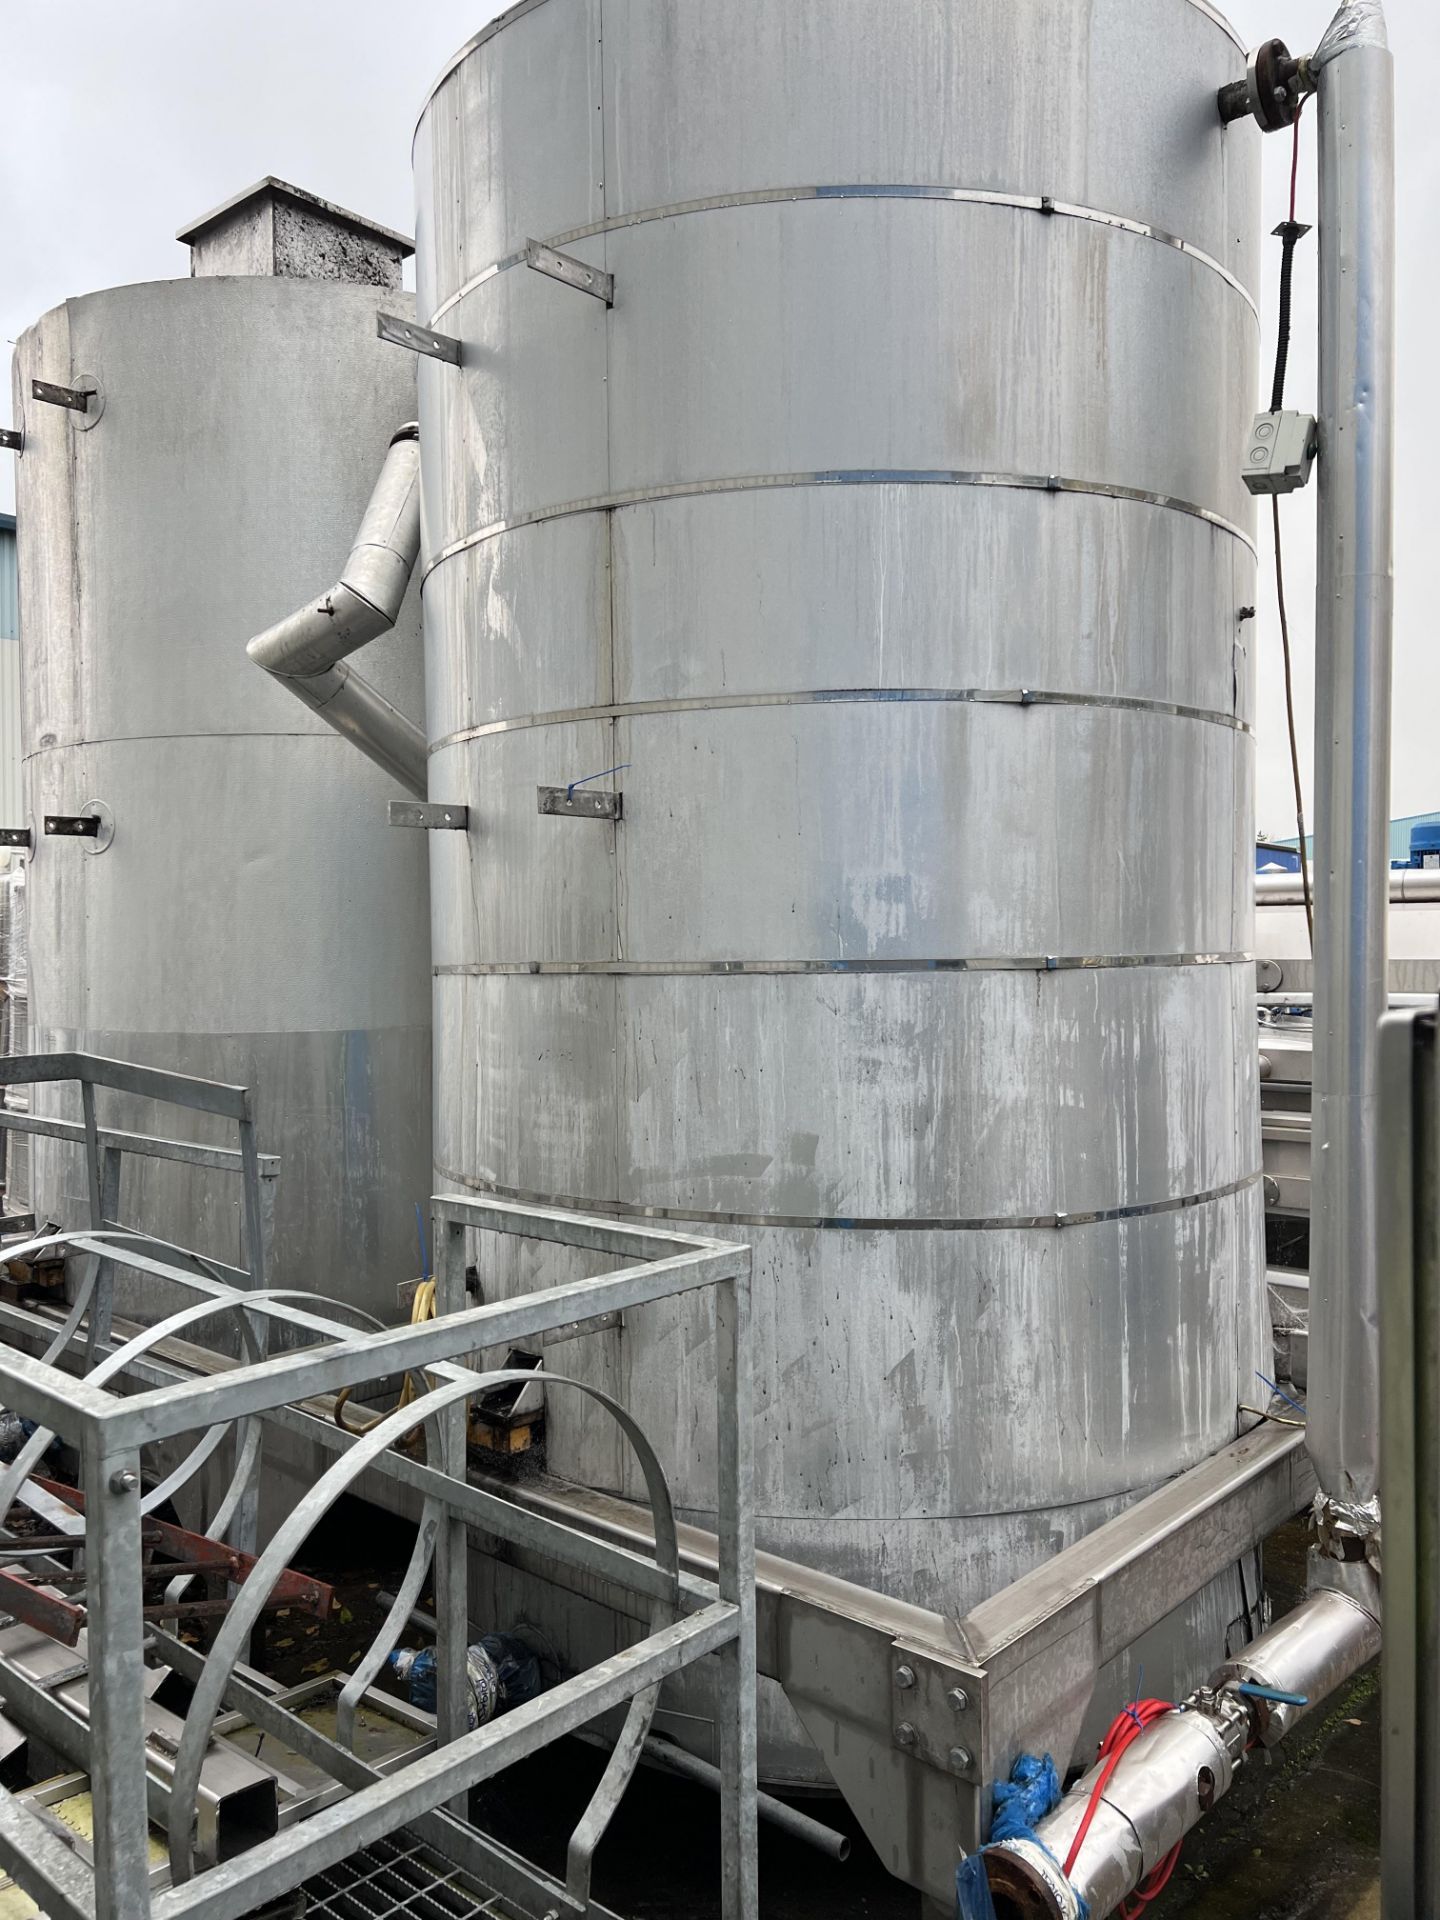 Two Stainless Steel Insulated Tanks, mounted on gantry (been used for storing cooking oil), code. - Image 4 of 4